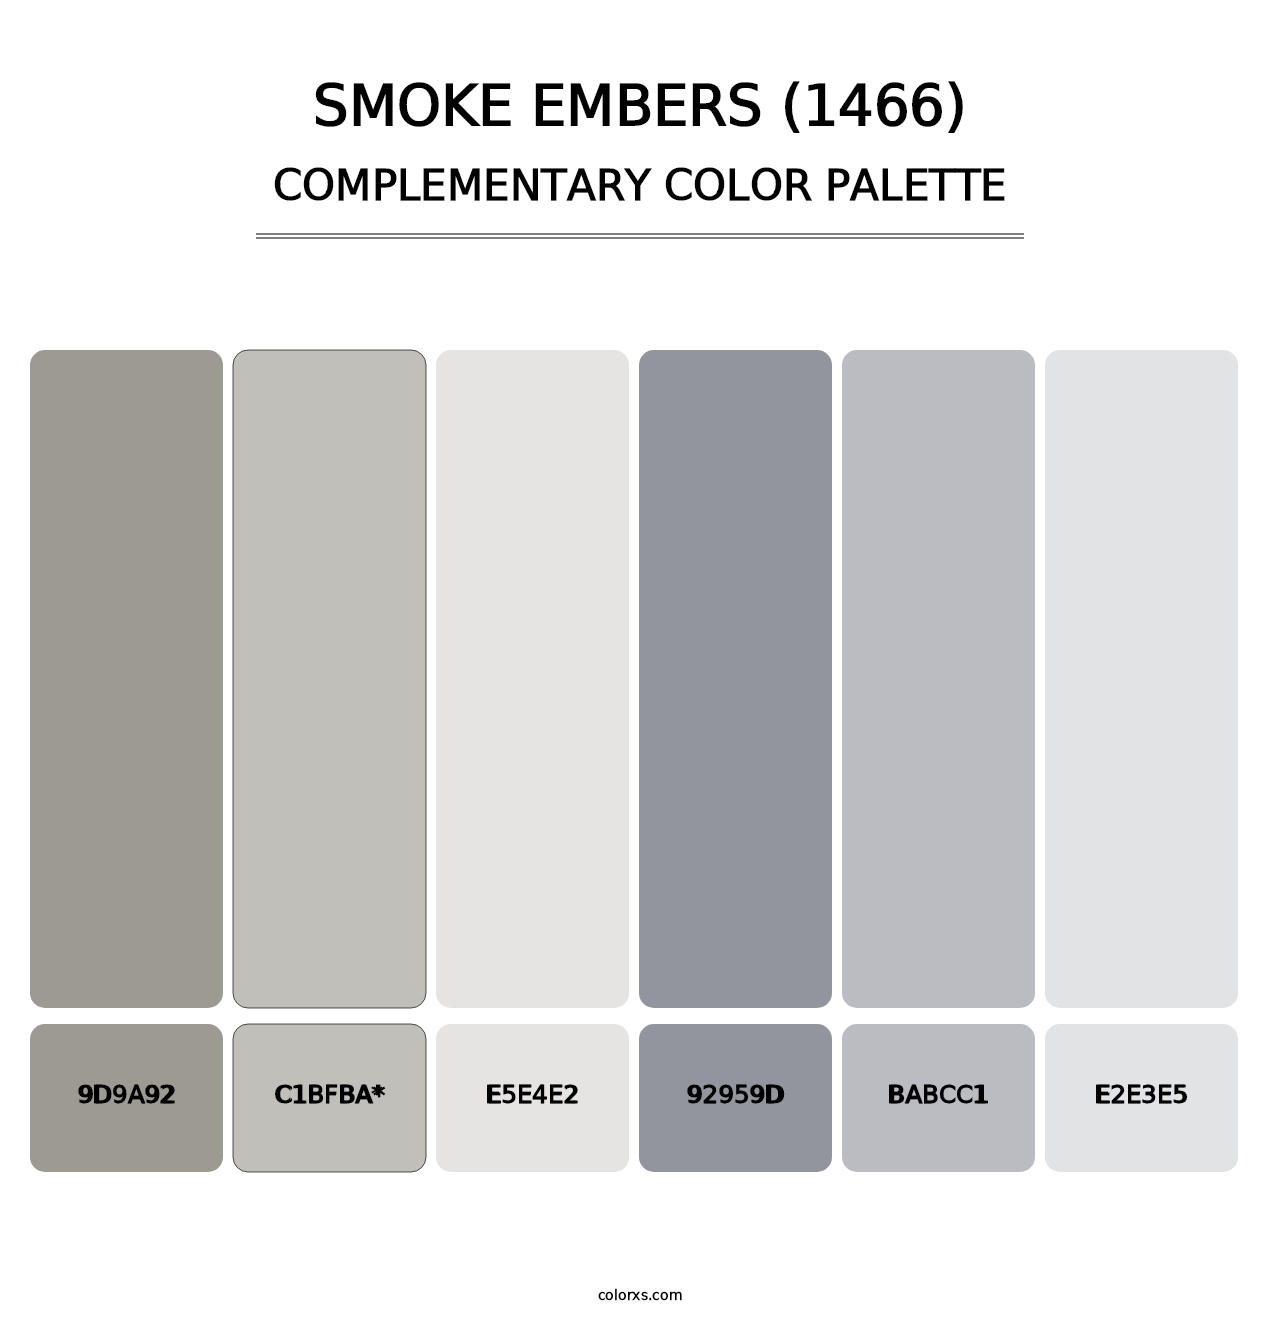 Smoke Embers (1466) - Complementary Color Palette